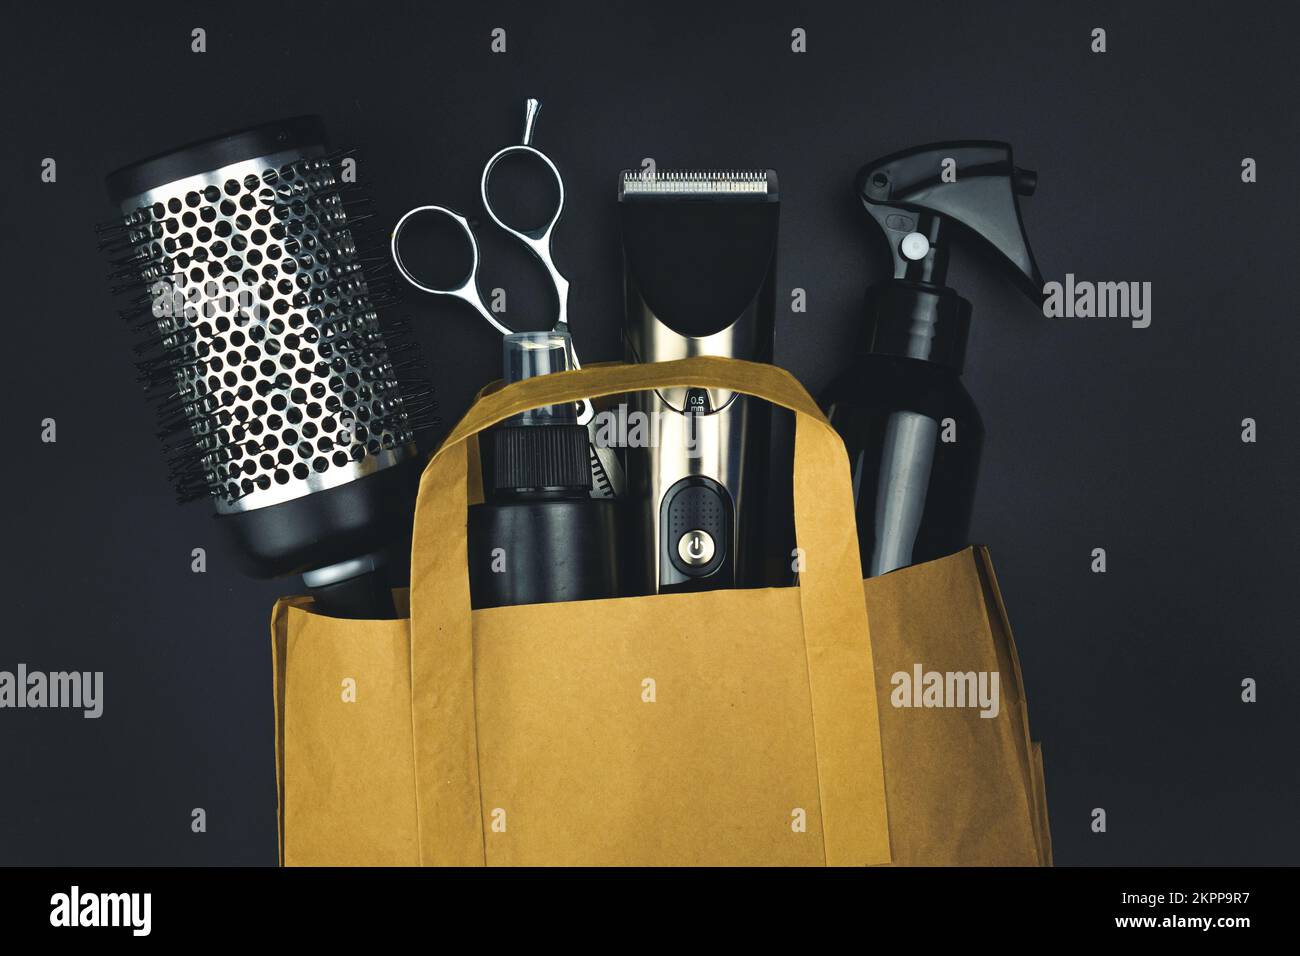 A set of hairdressing combs and scissors in black color in a craft package on black background Stock Photo